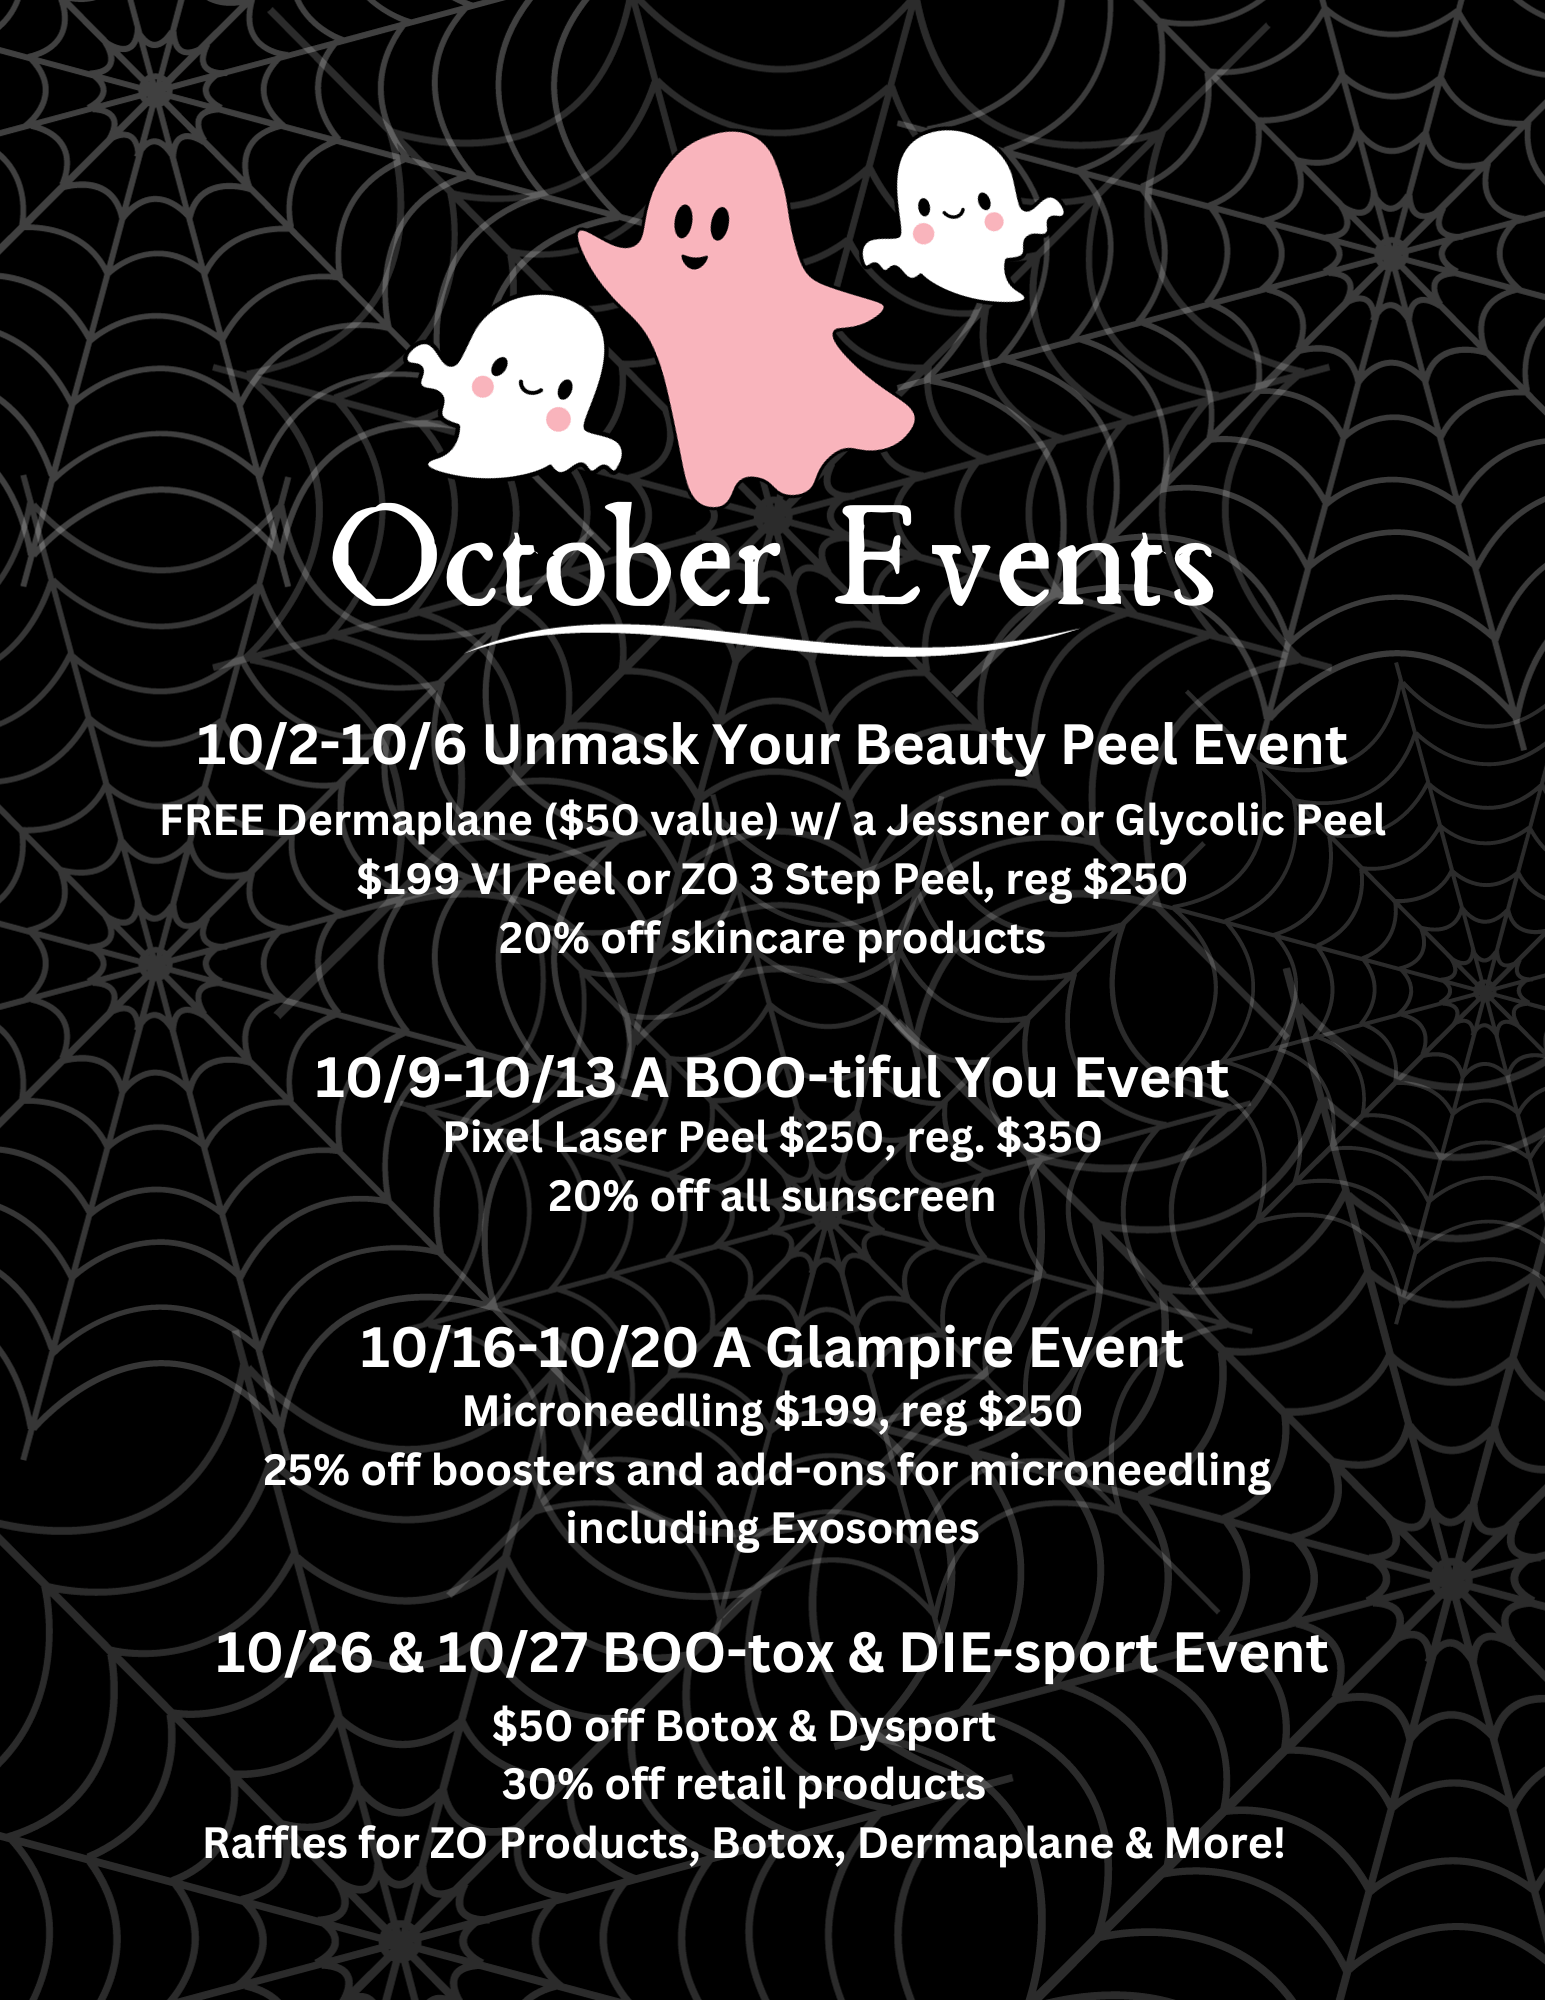 A black background flyer depicting one pink ghost and two white ghosts, floating in front of cobwebs titled October Events